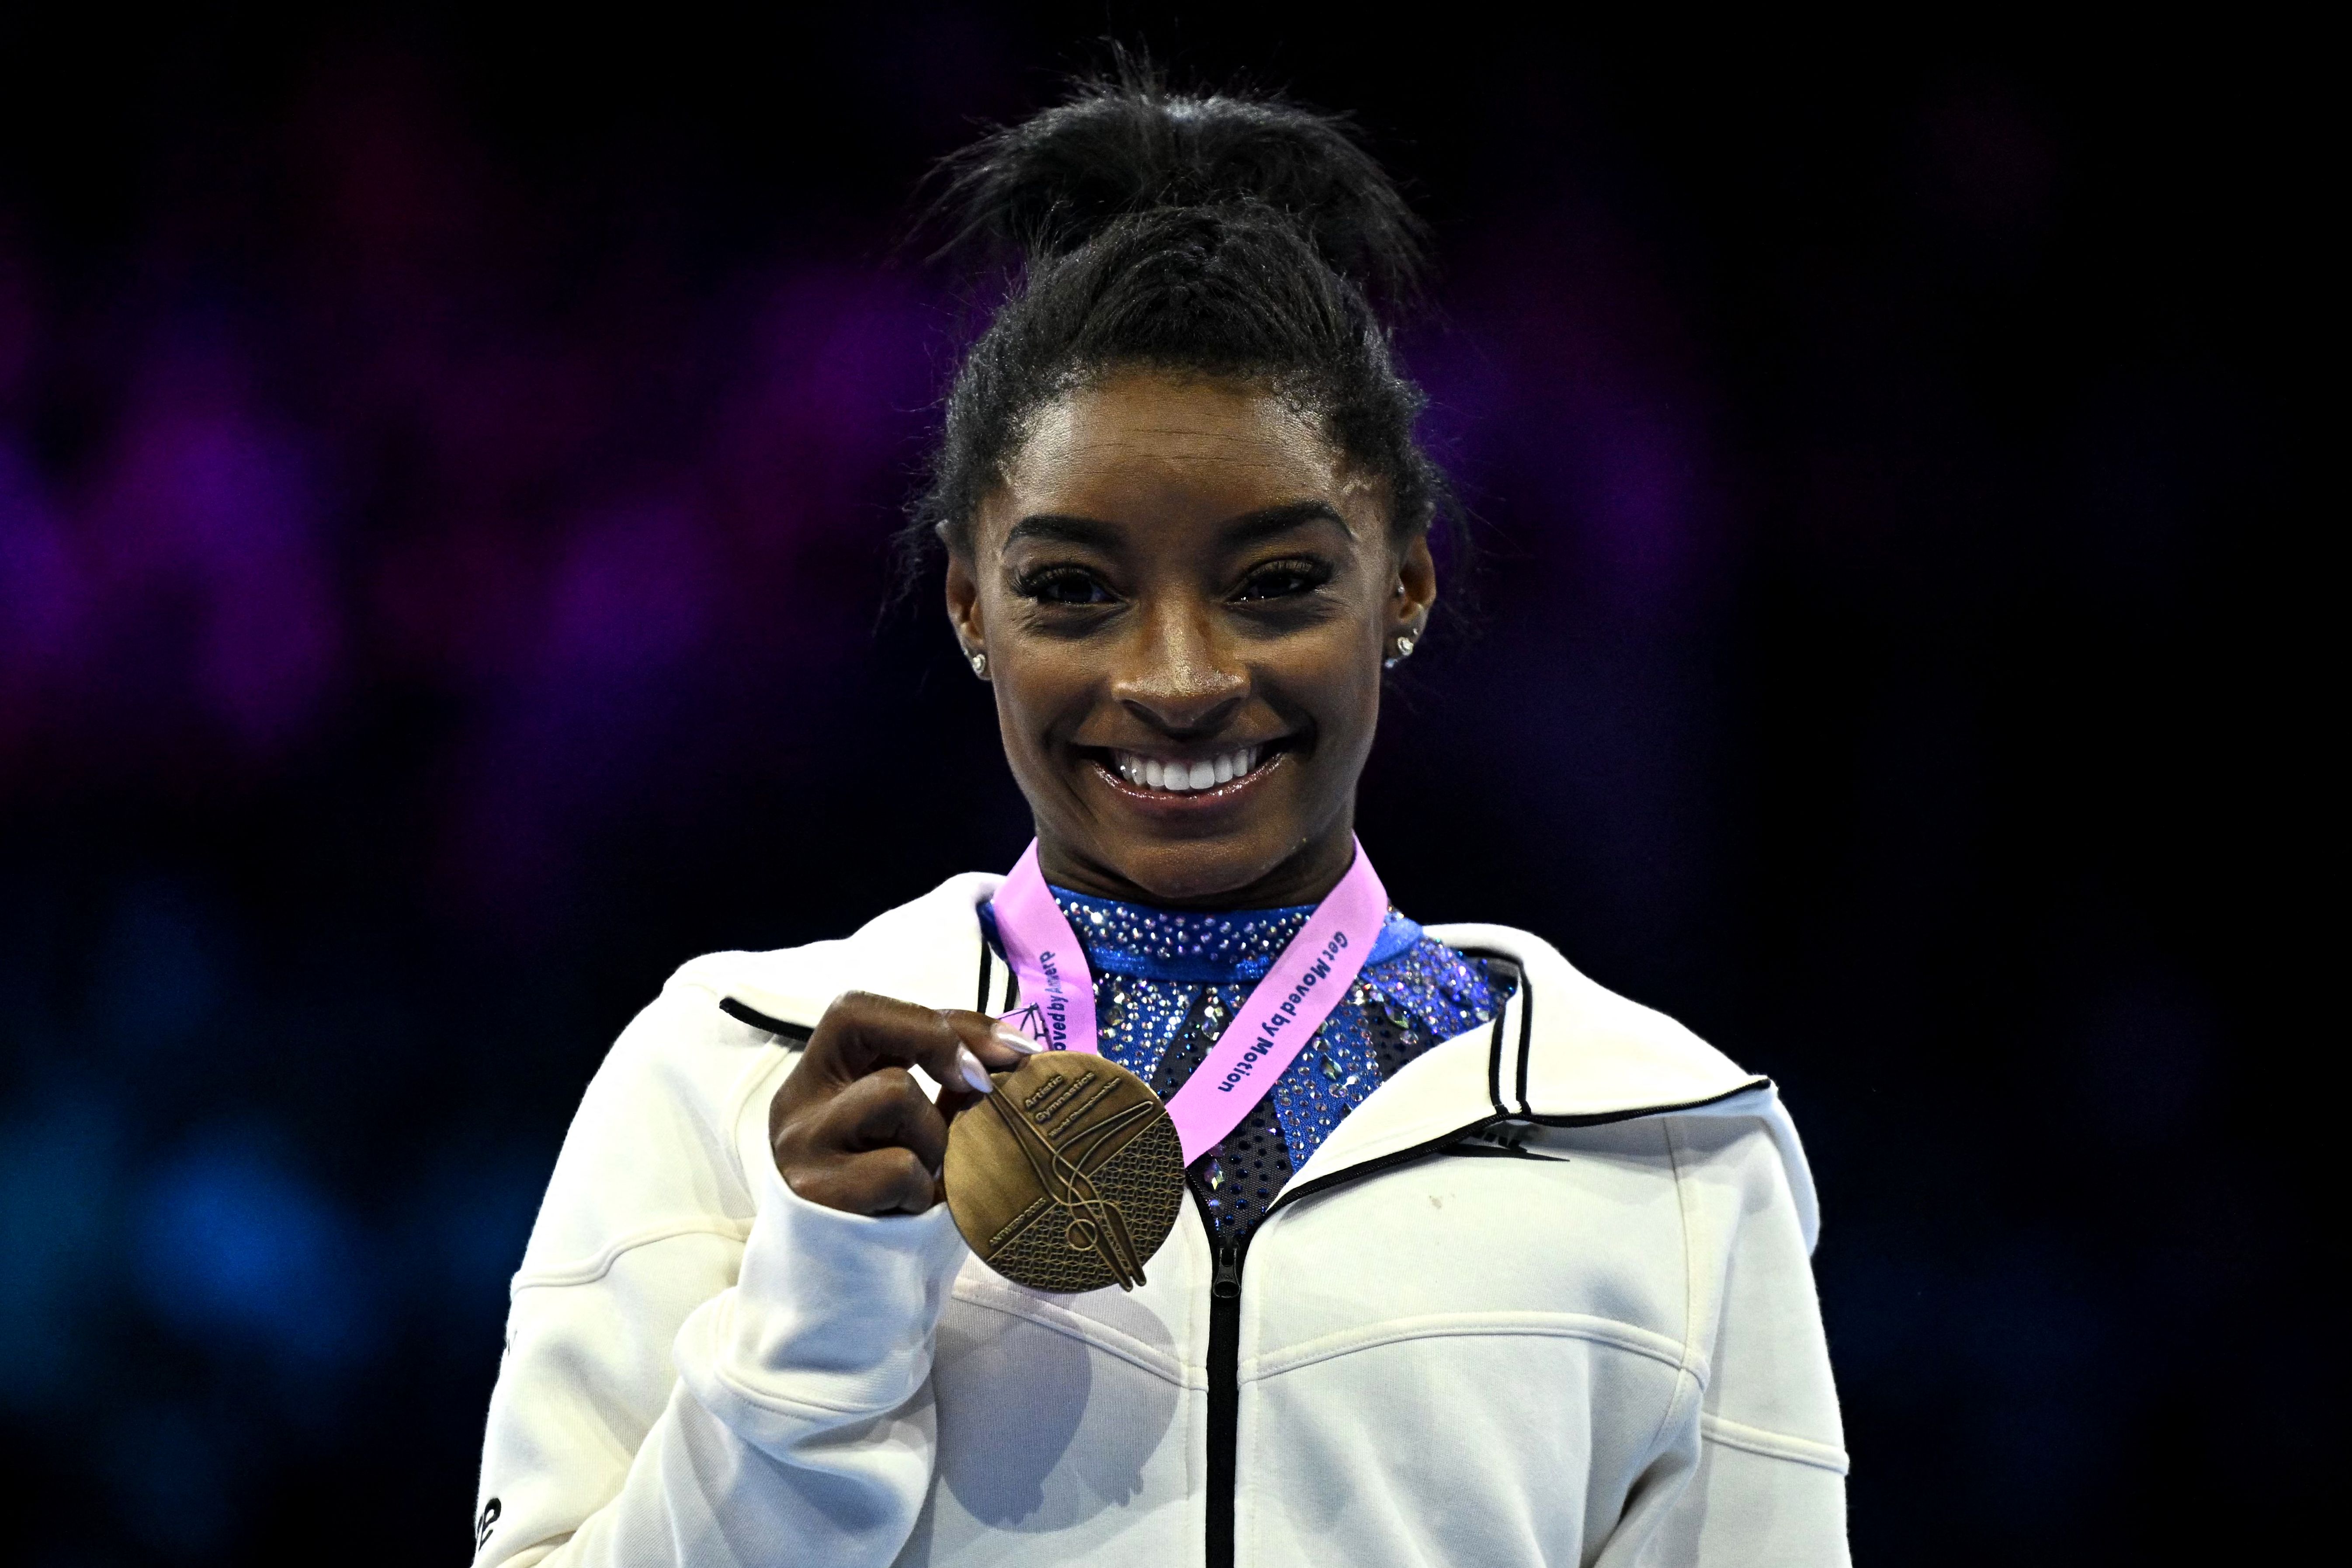 Simone Biles wins sixth all-around title at worlds to become most decorated  gymnast in history - The Boston Globe